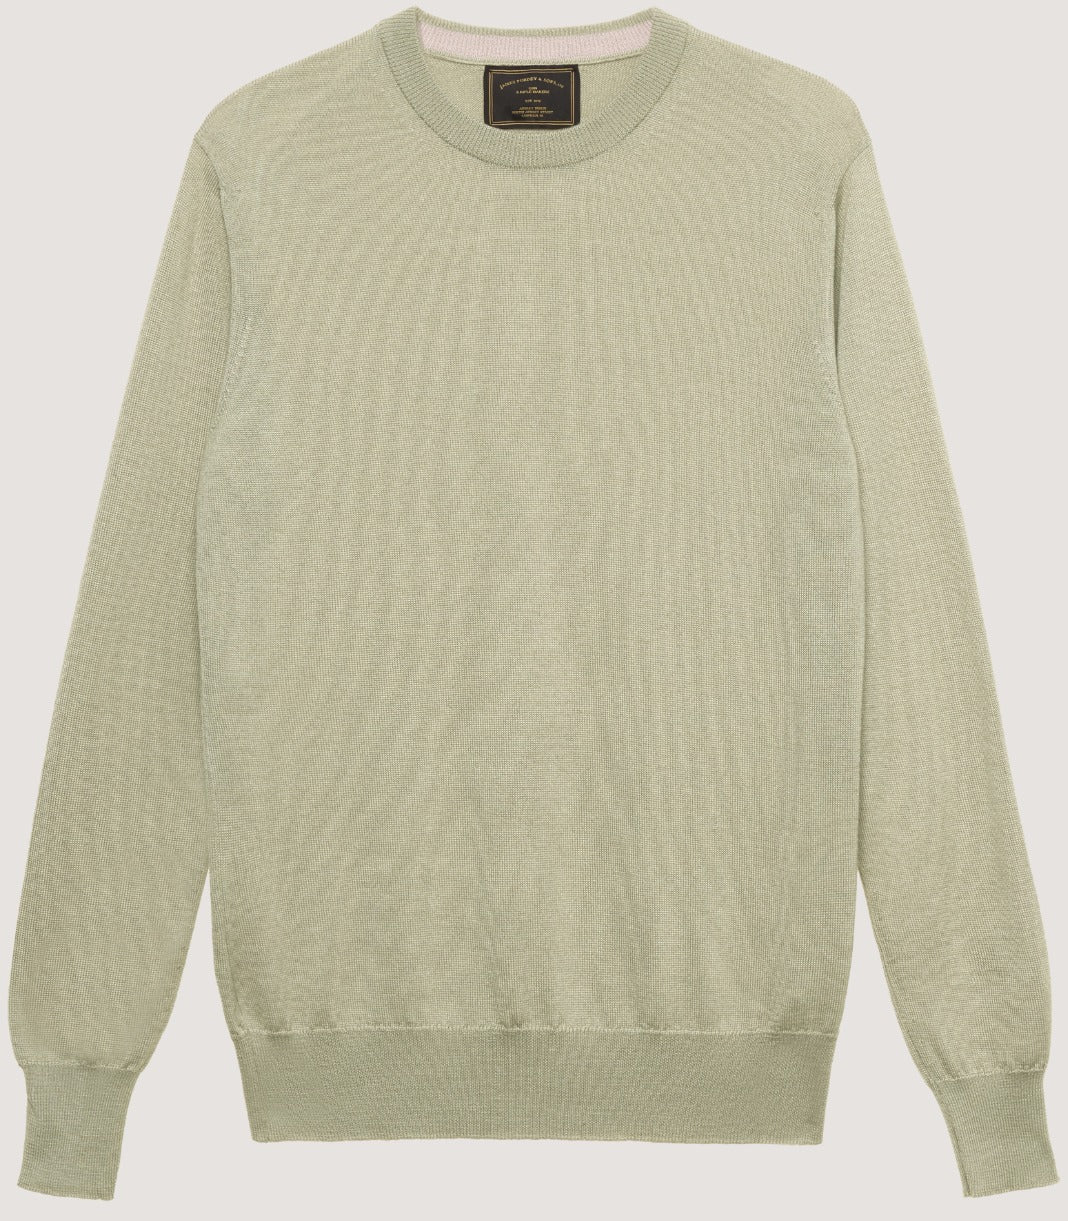 Ladies Silk Blend Crew Neck Sweater - Oyster X 16 In Oyster